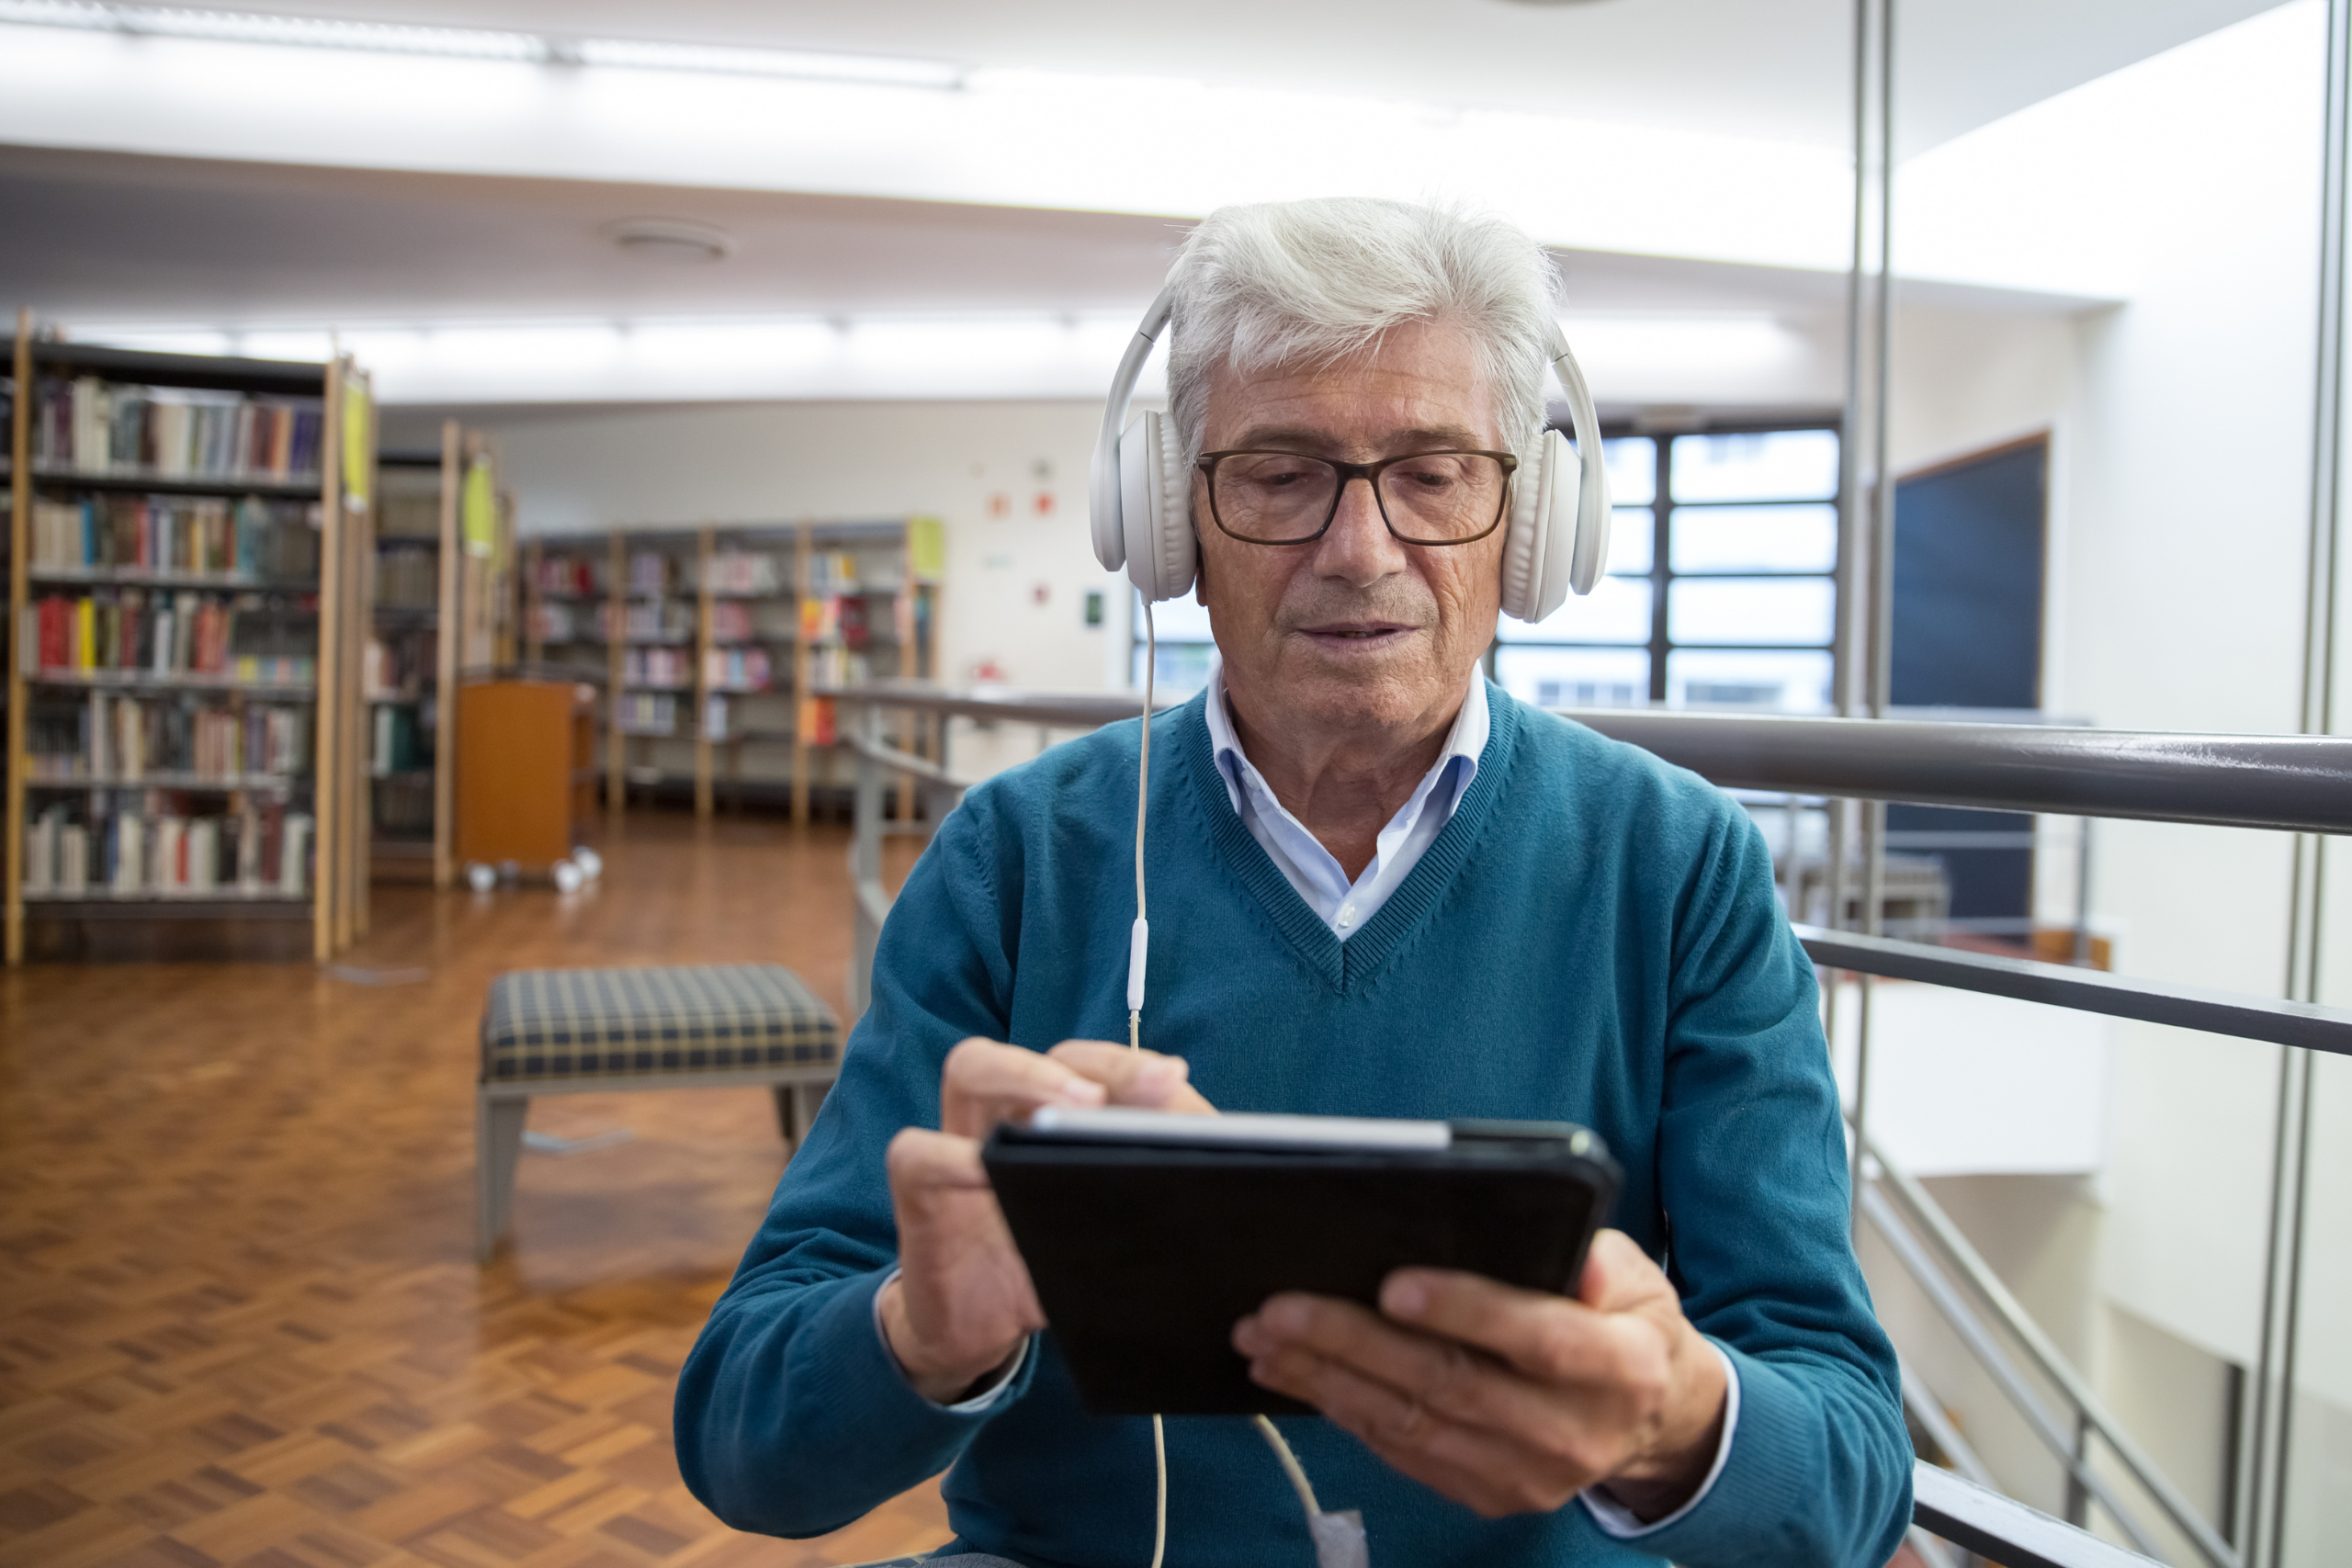 An older man in a library with a tablet